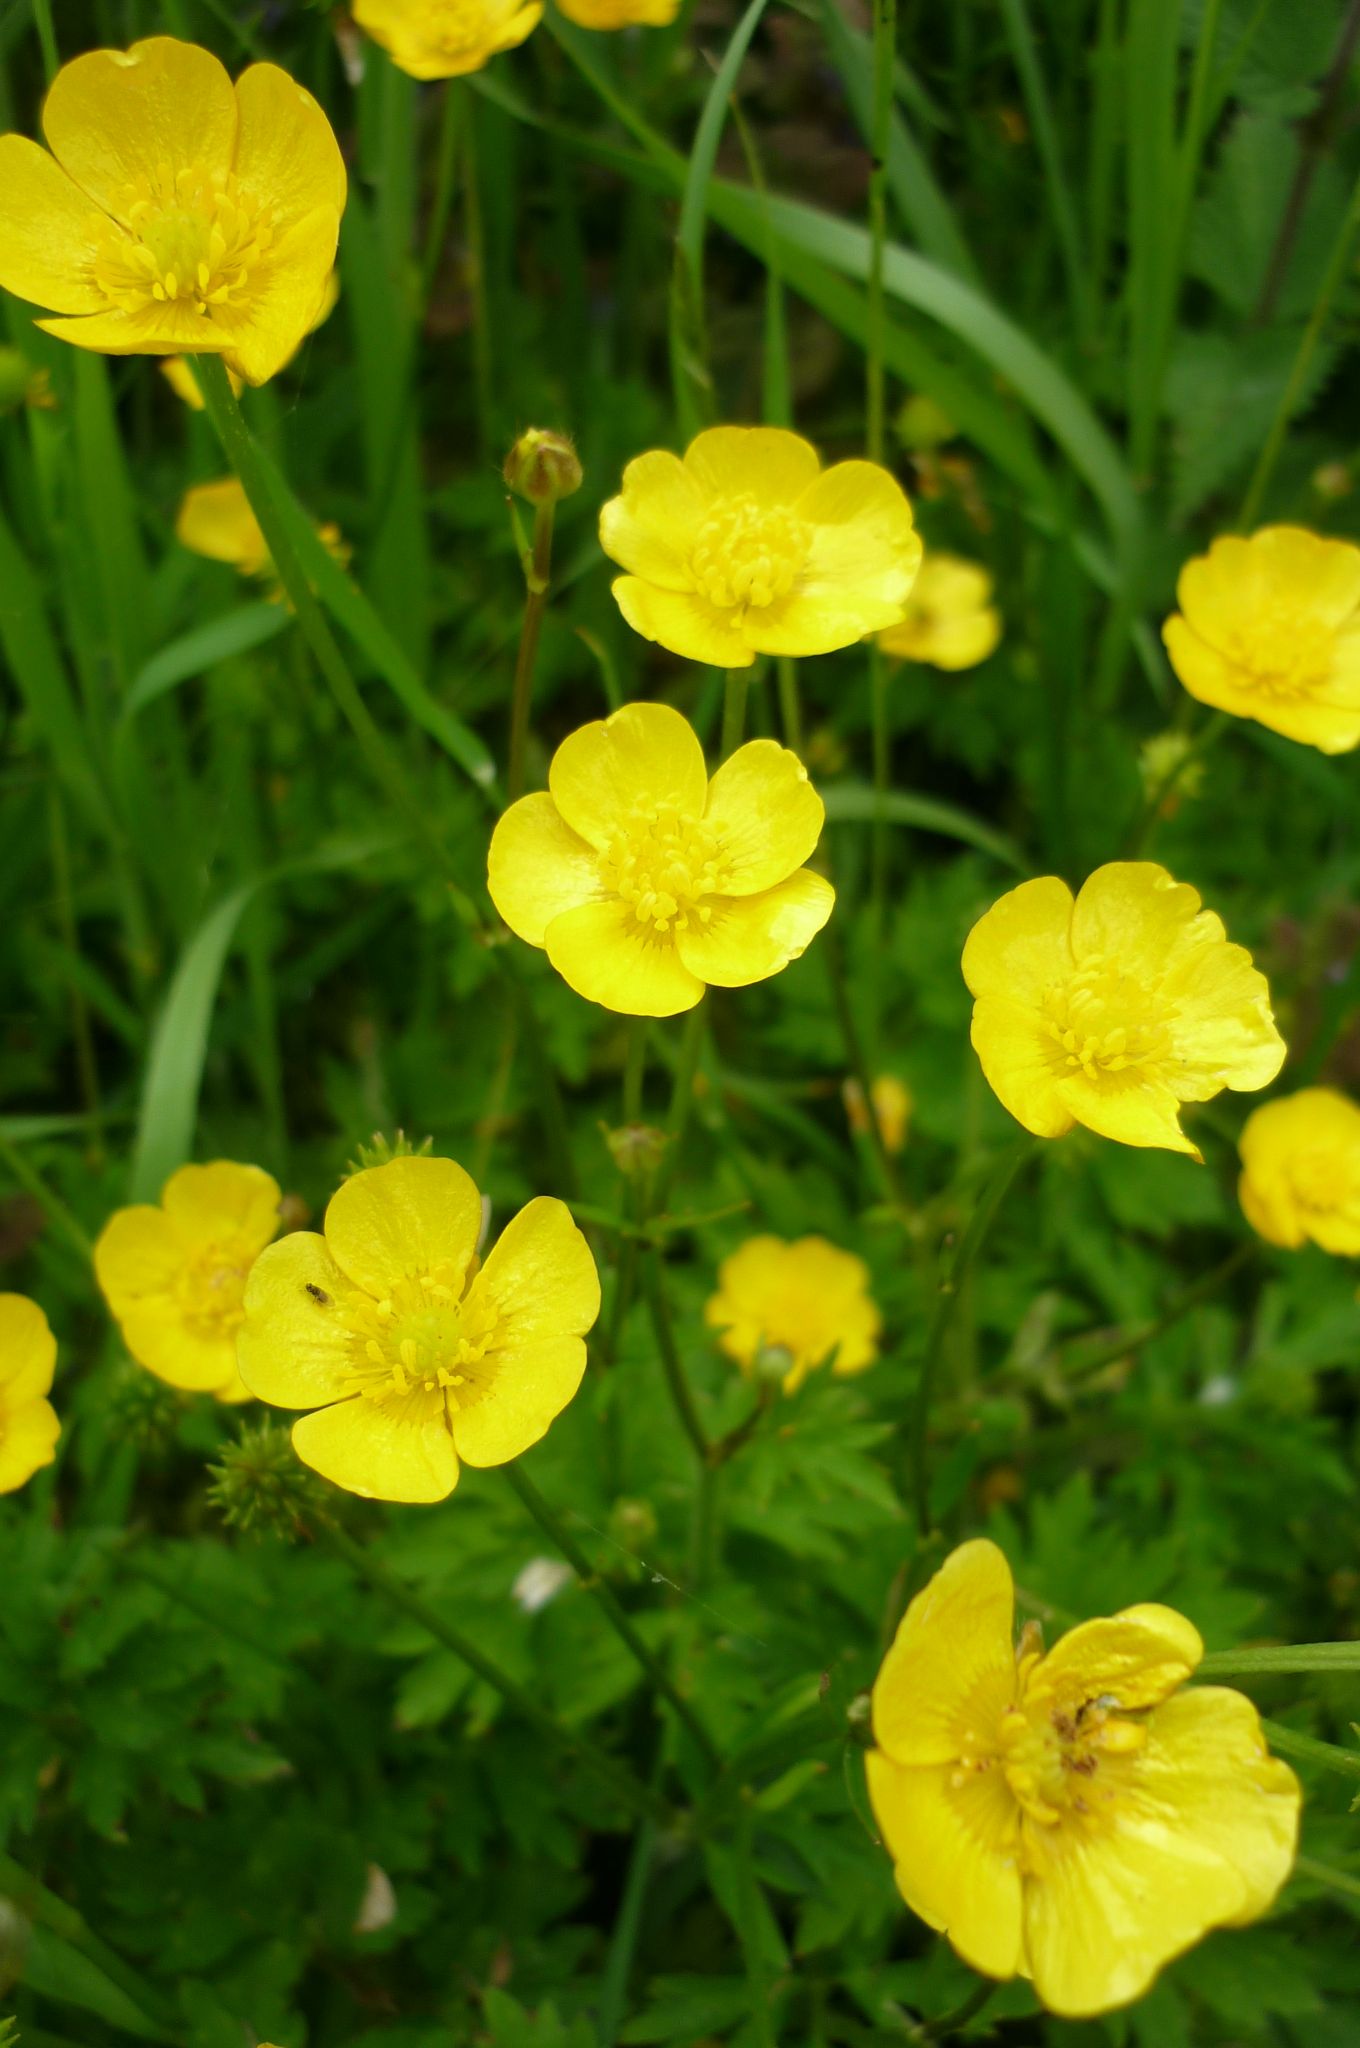 One legend says fairies created buttercups. When a group